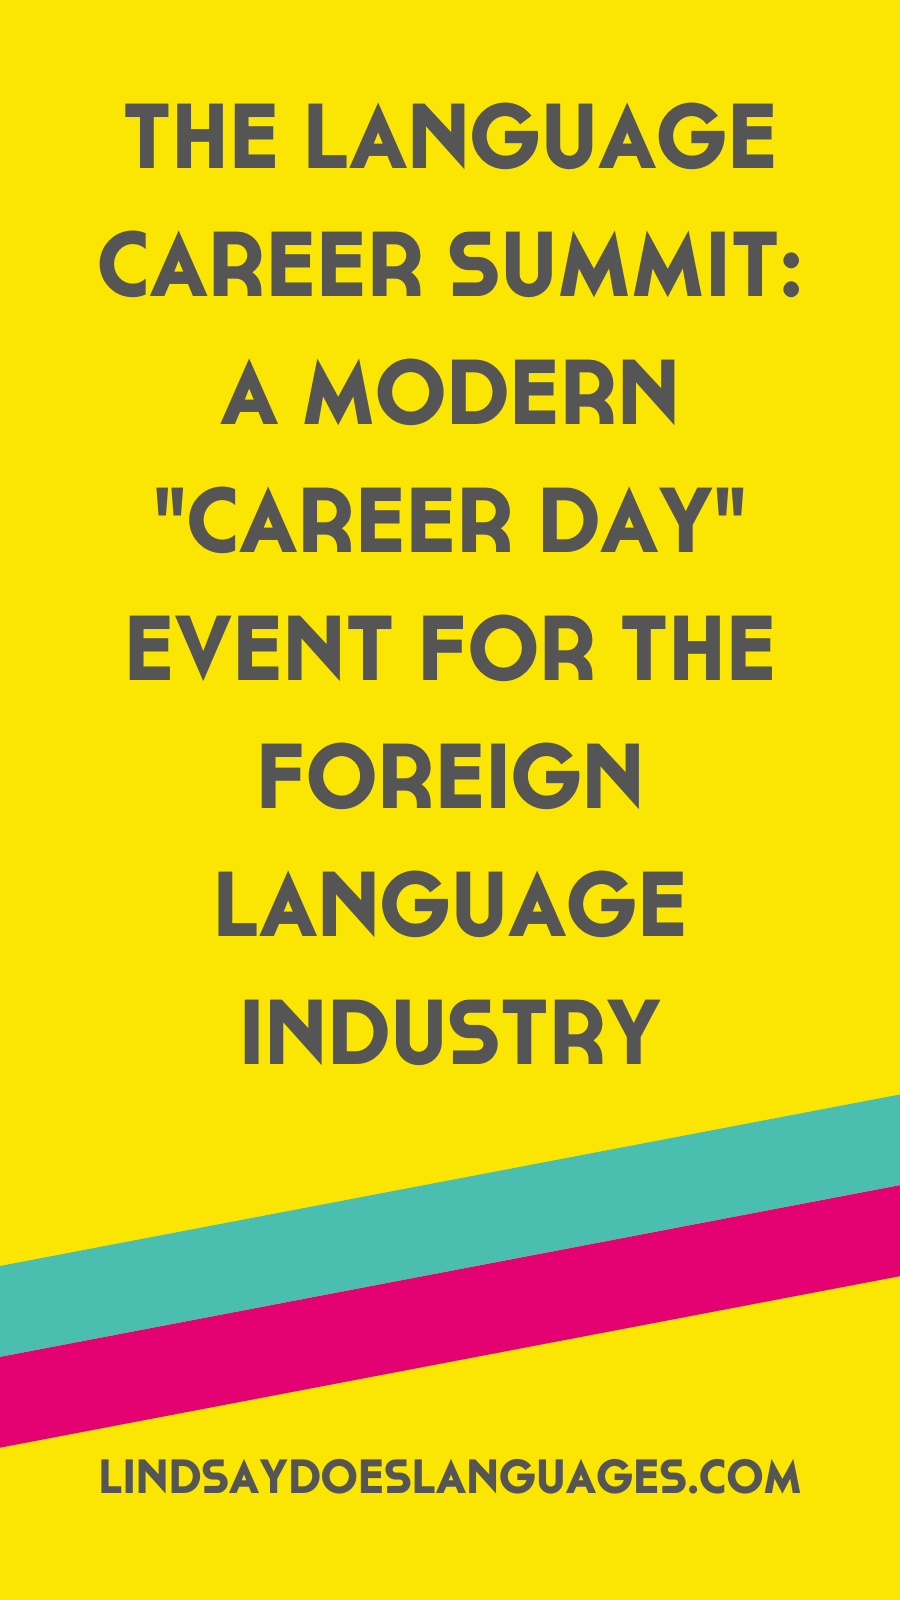 Join me and others at the Language Career Summit - a modern 'career day' event for the foreign language industry.